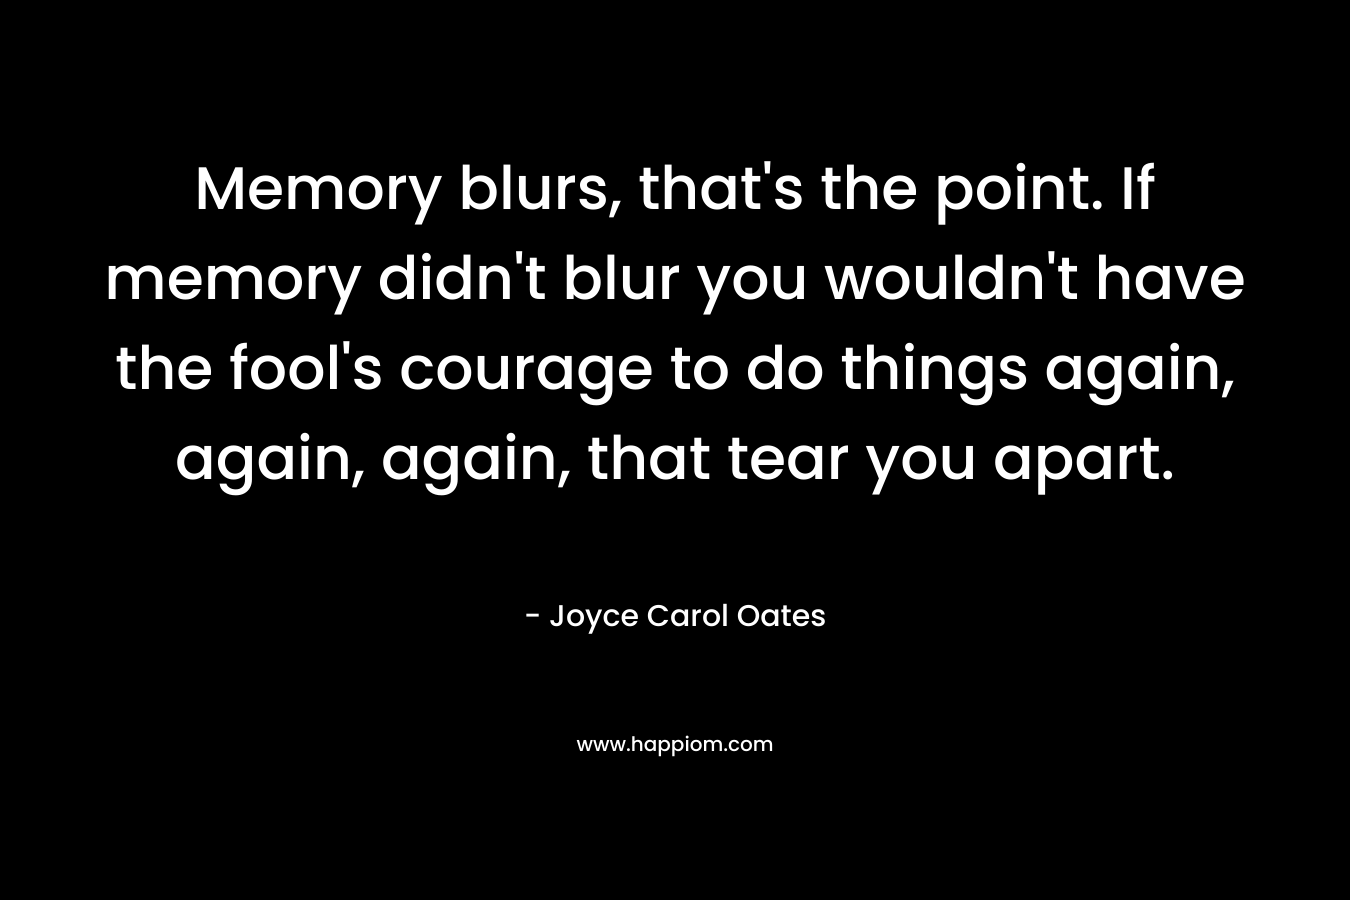 Memory blurs, that's the point. If memory didn't blur you wouldn't have the fool's courage to do things again, again, again, that tear you apart.